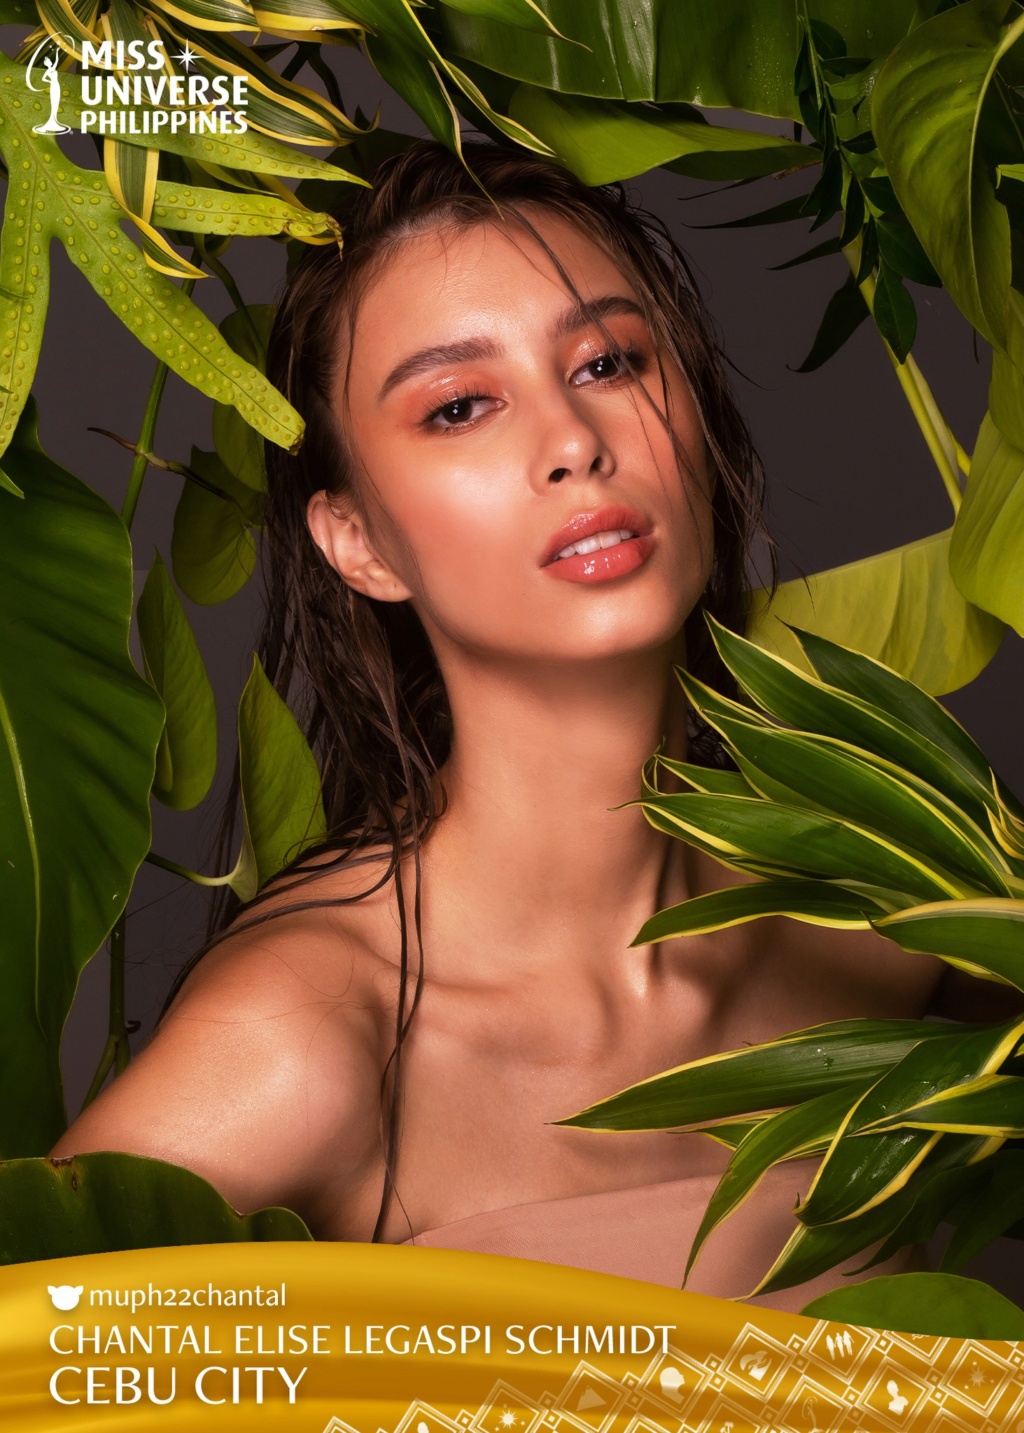 ROAD TO MISS UNIVERSE PHILIPPINES 2022 is is Miss Pasay, Celeste Cortesi - Page 5 27556021